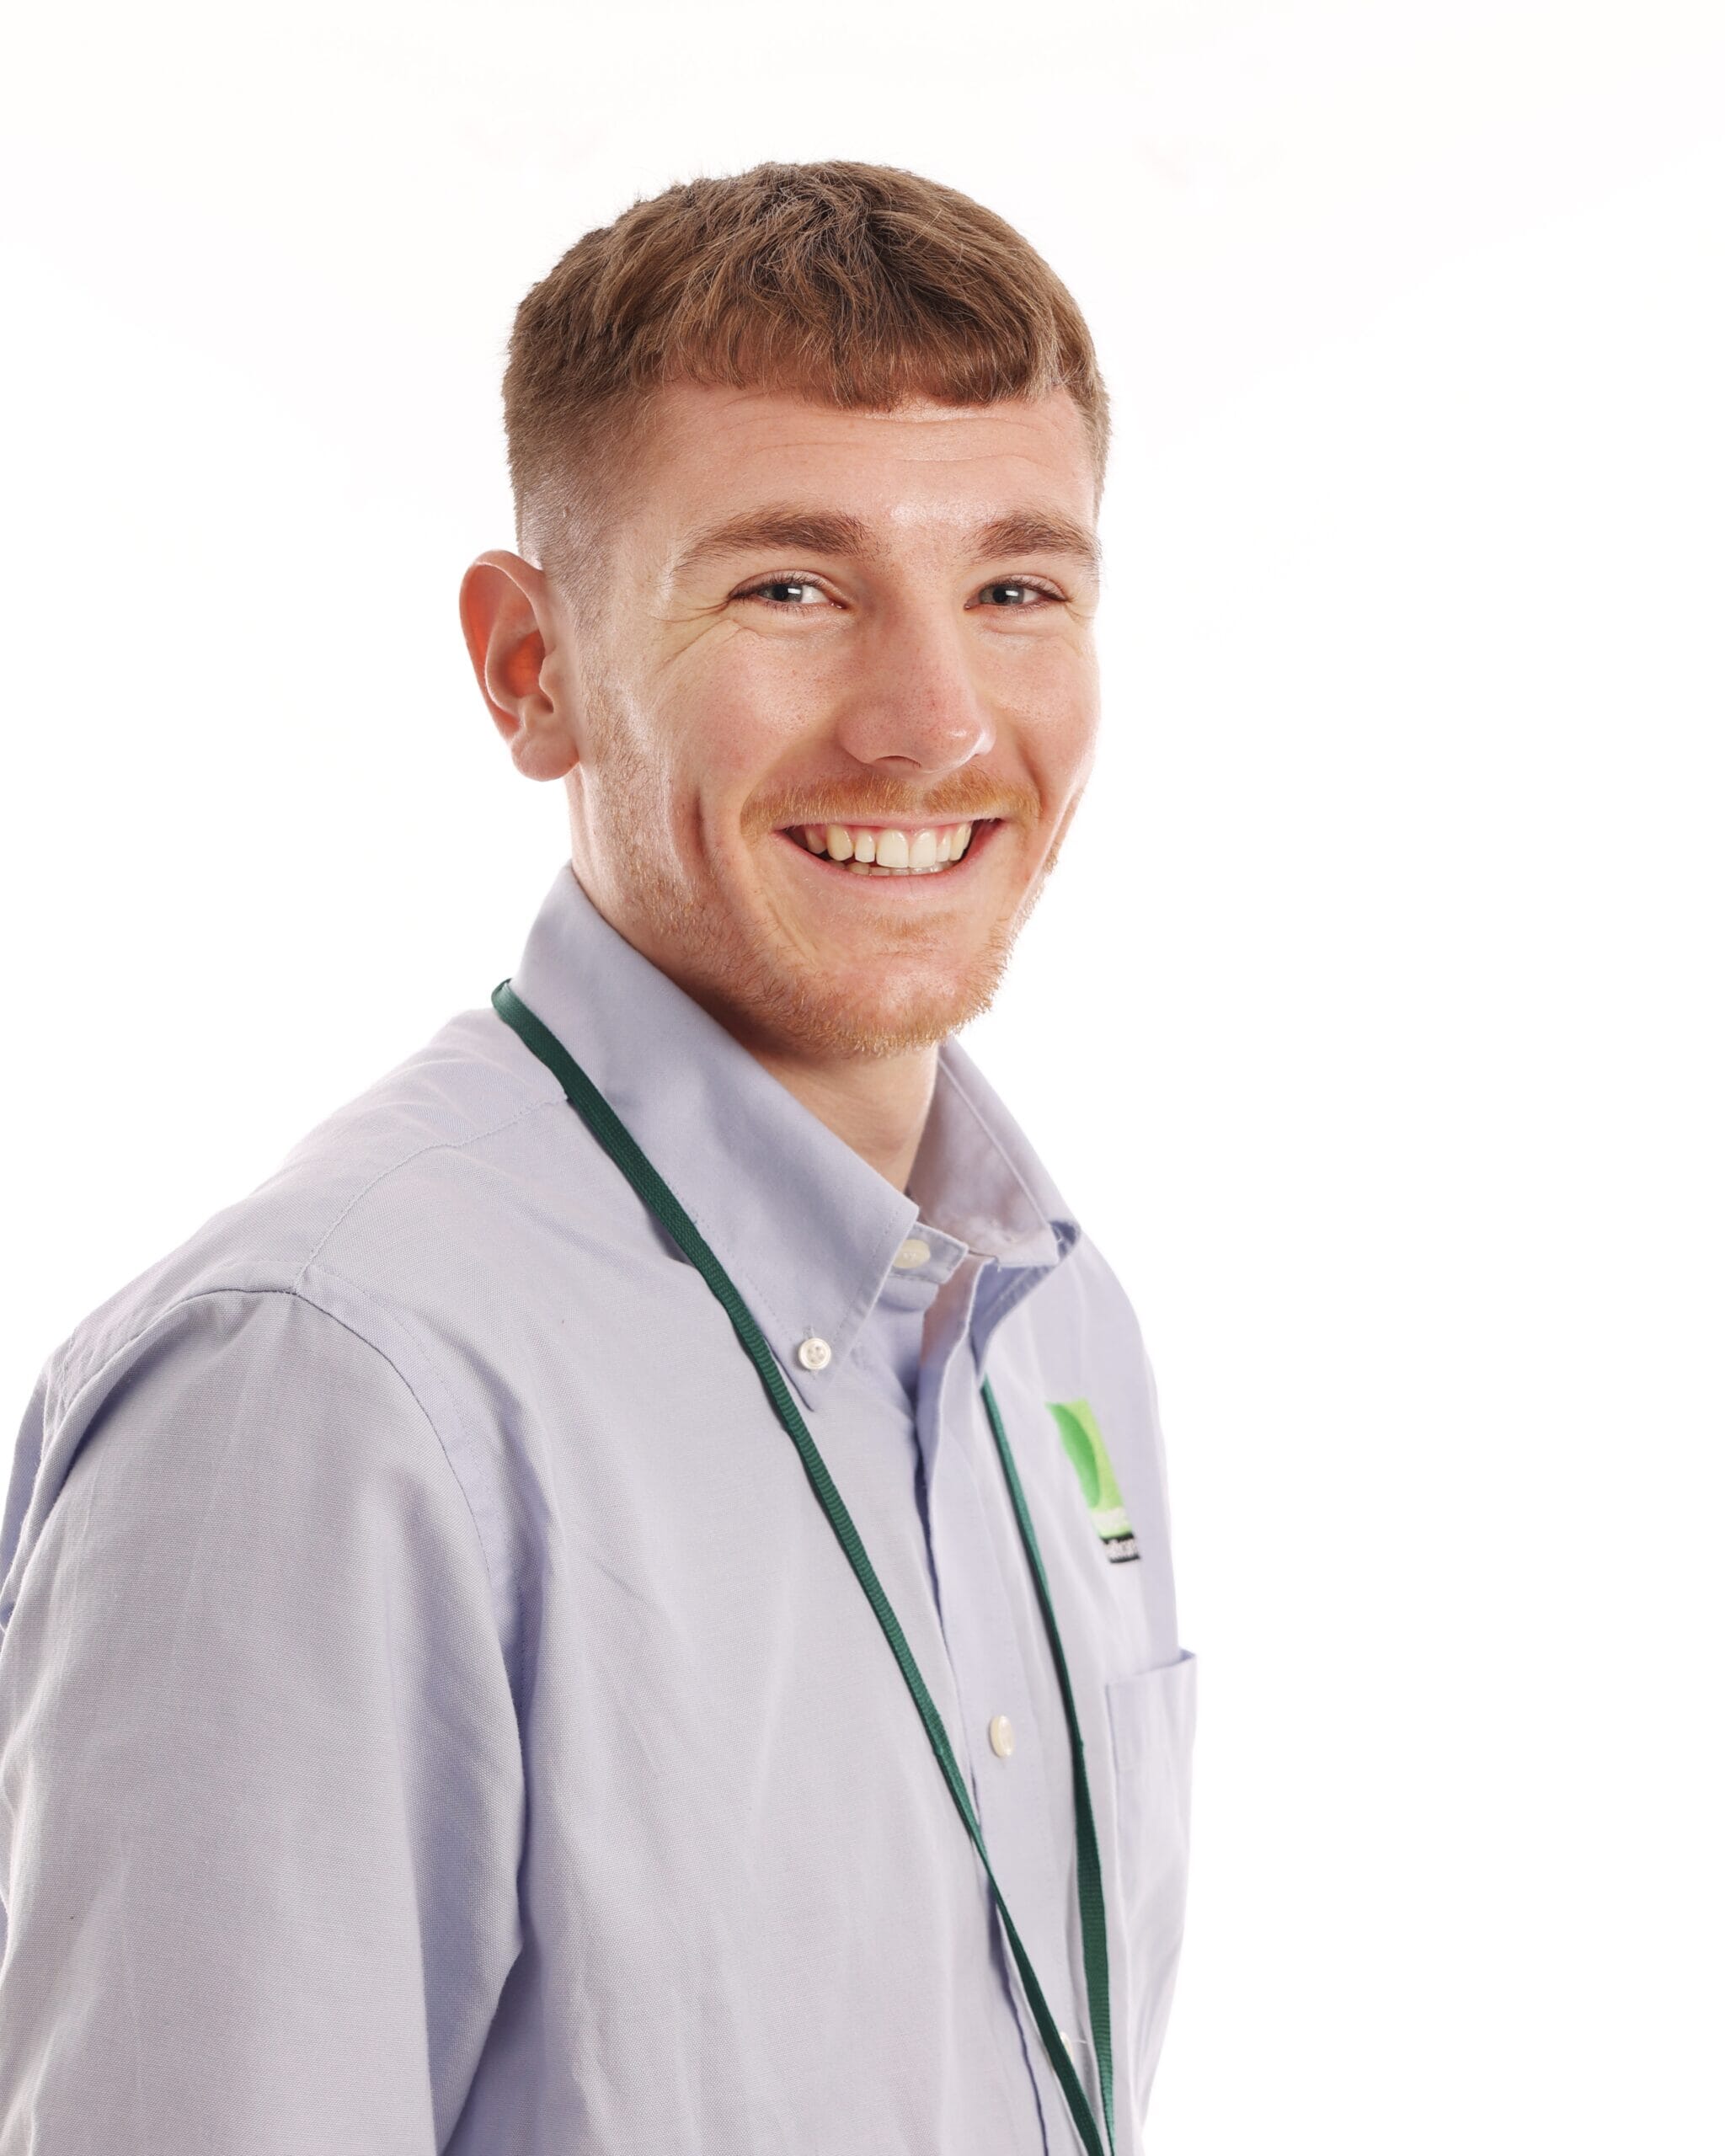 Rory Keen, Sales Assessor for Premiere Healthcare